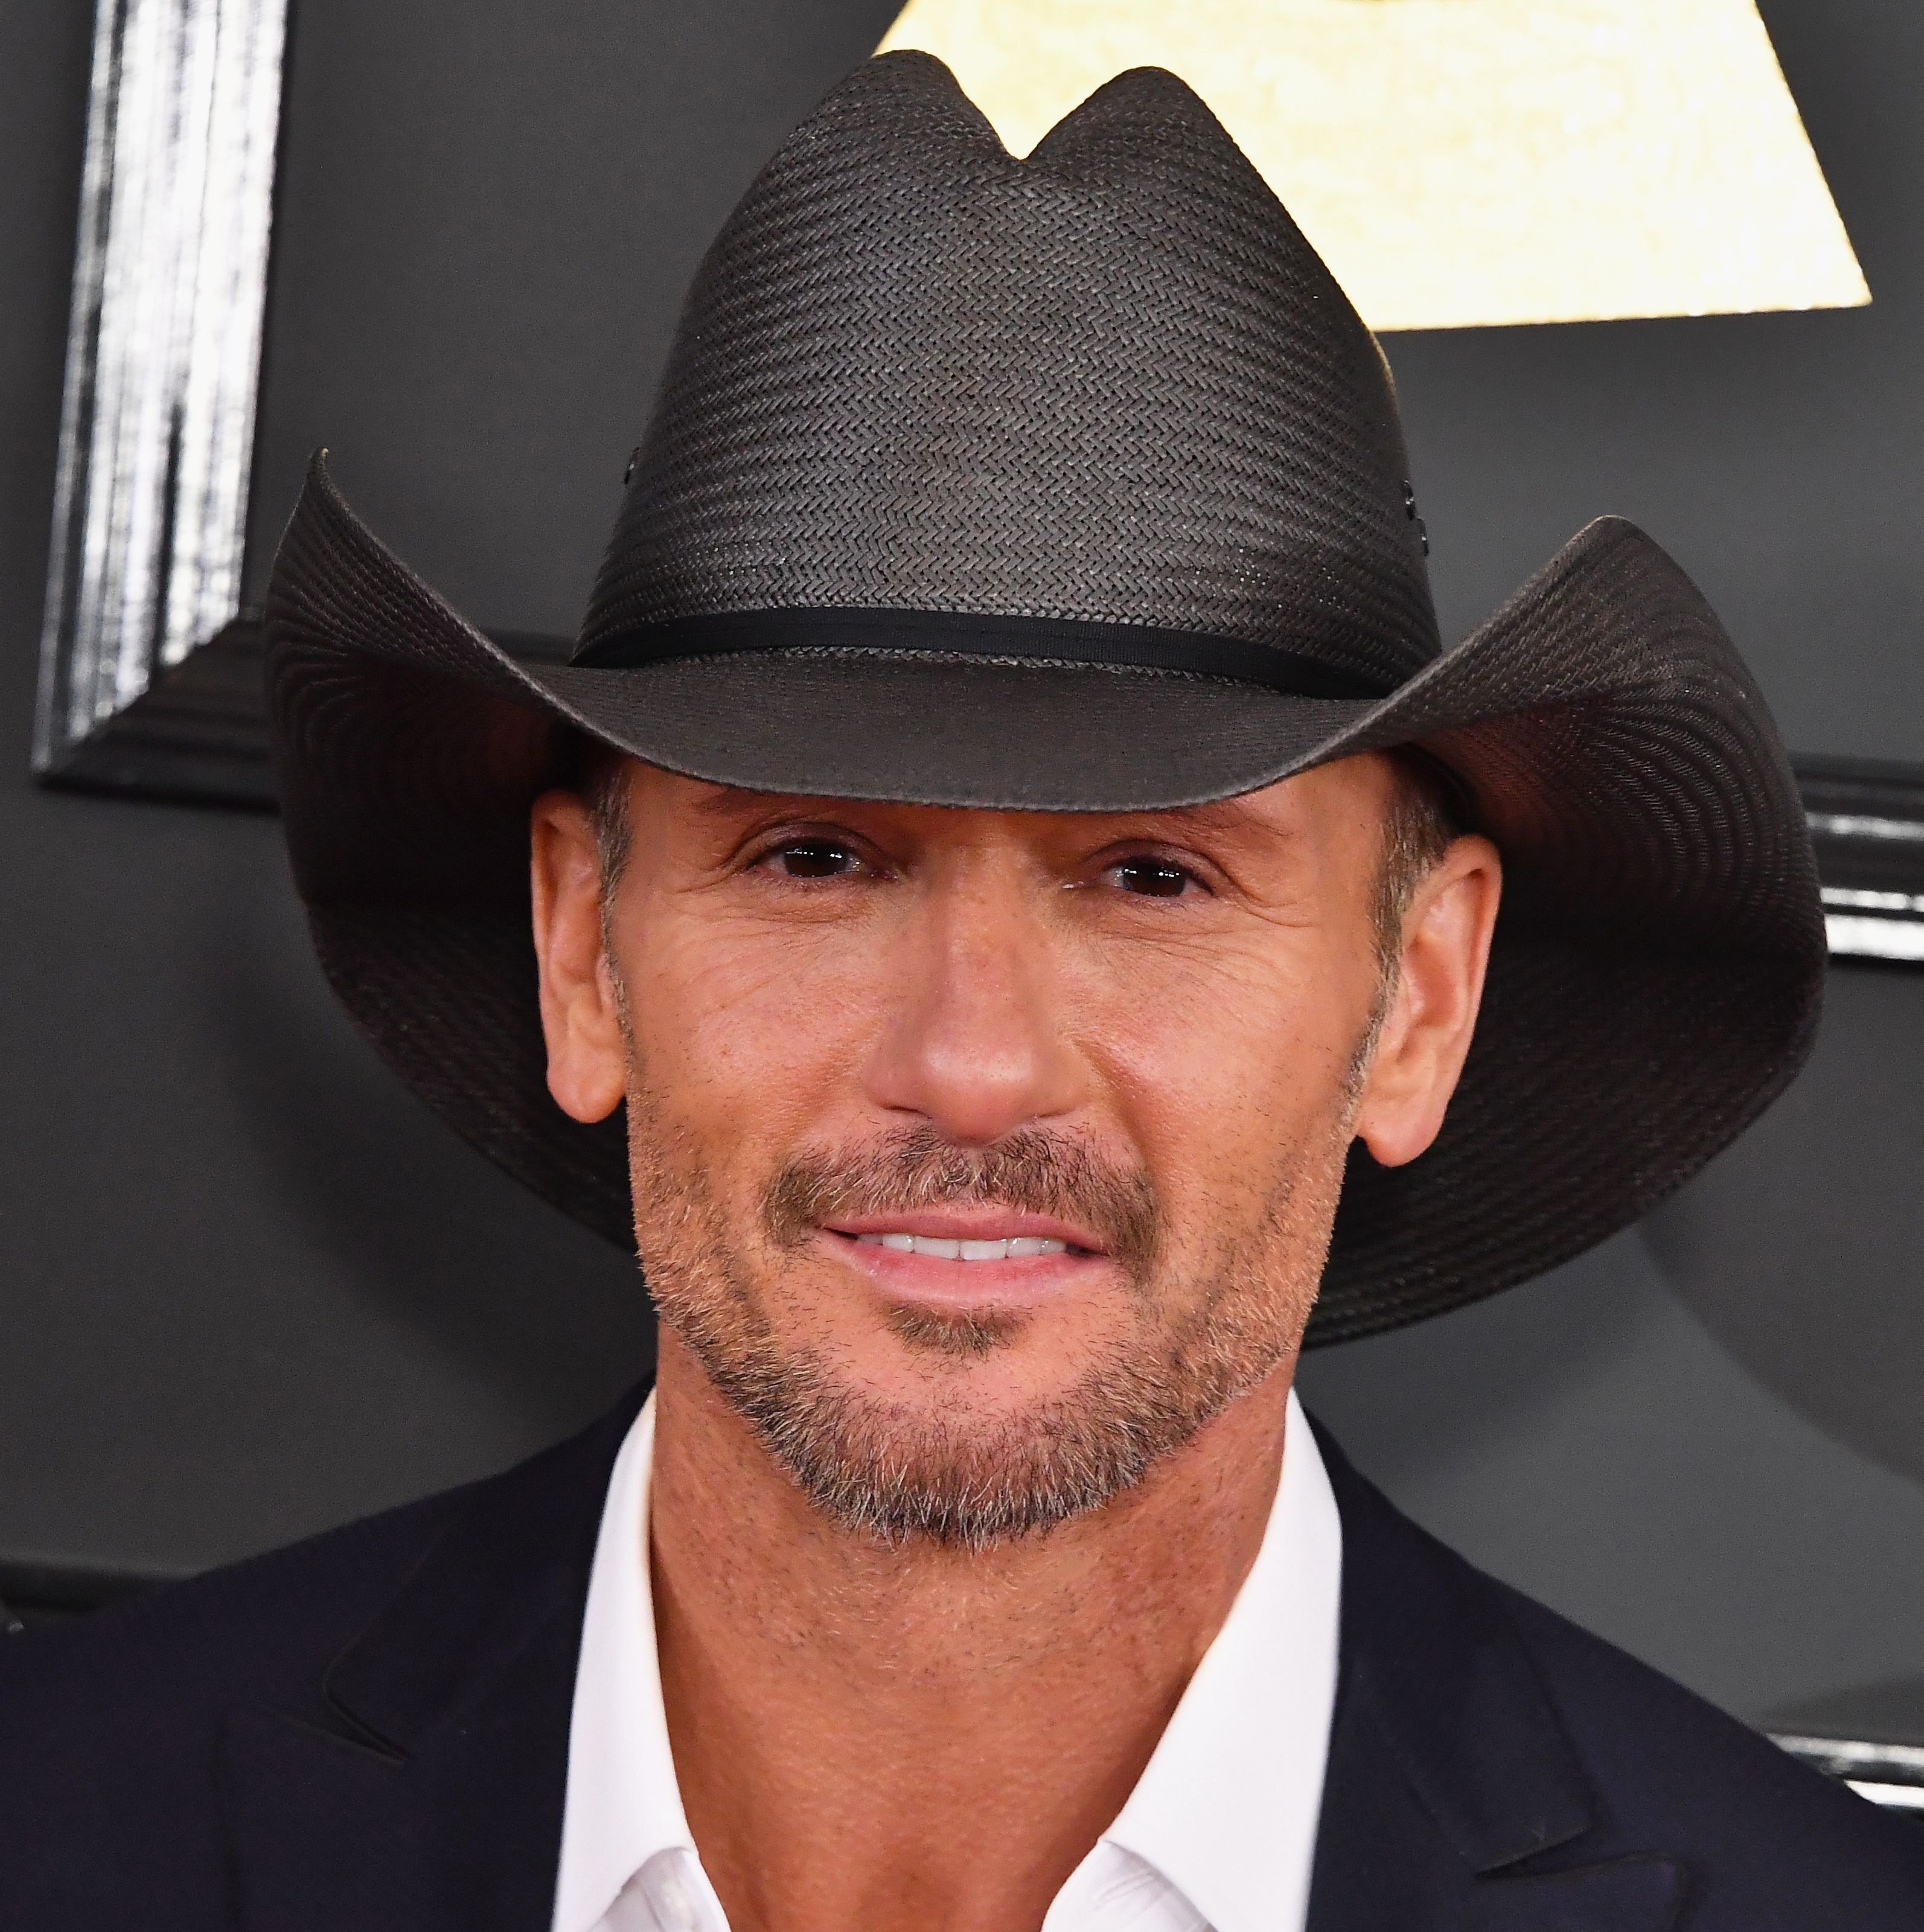 tim mcgraw live like youre dying album